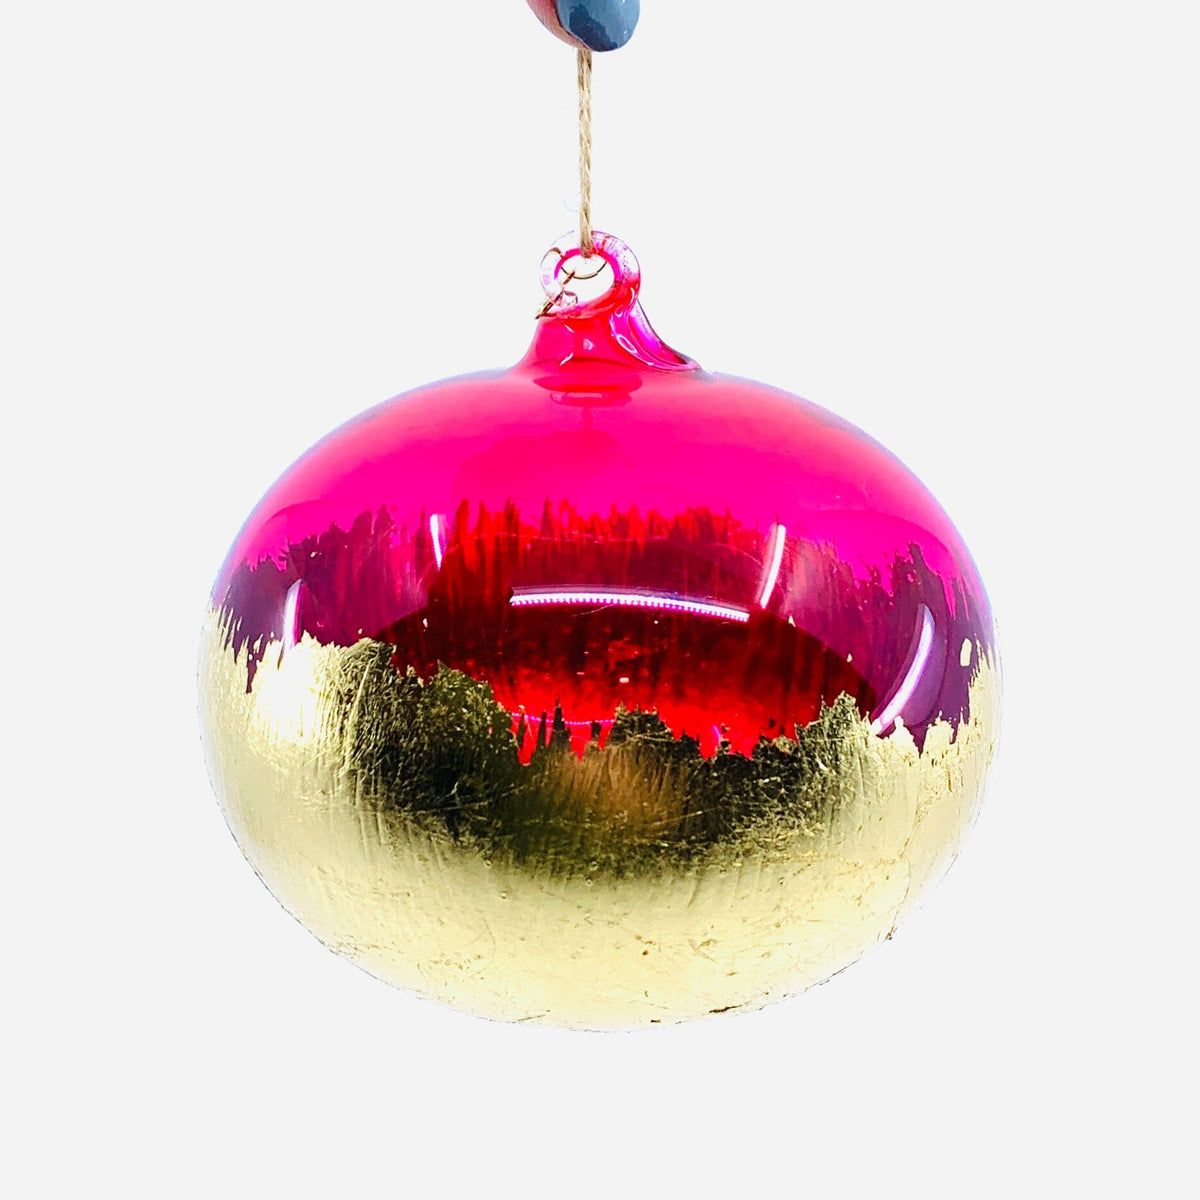 Rainbow Gold Dipped Orb Ornament One Hundred 80 Degrees A 